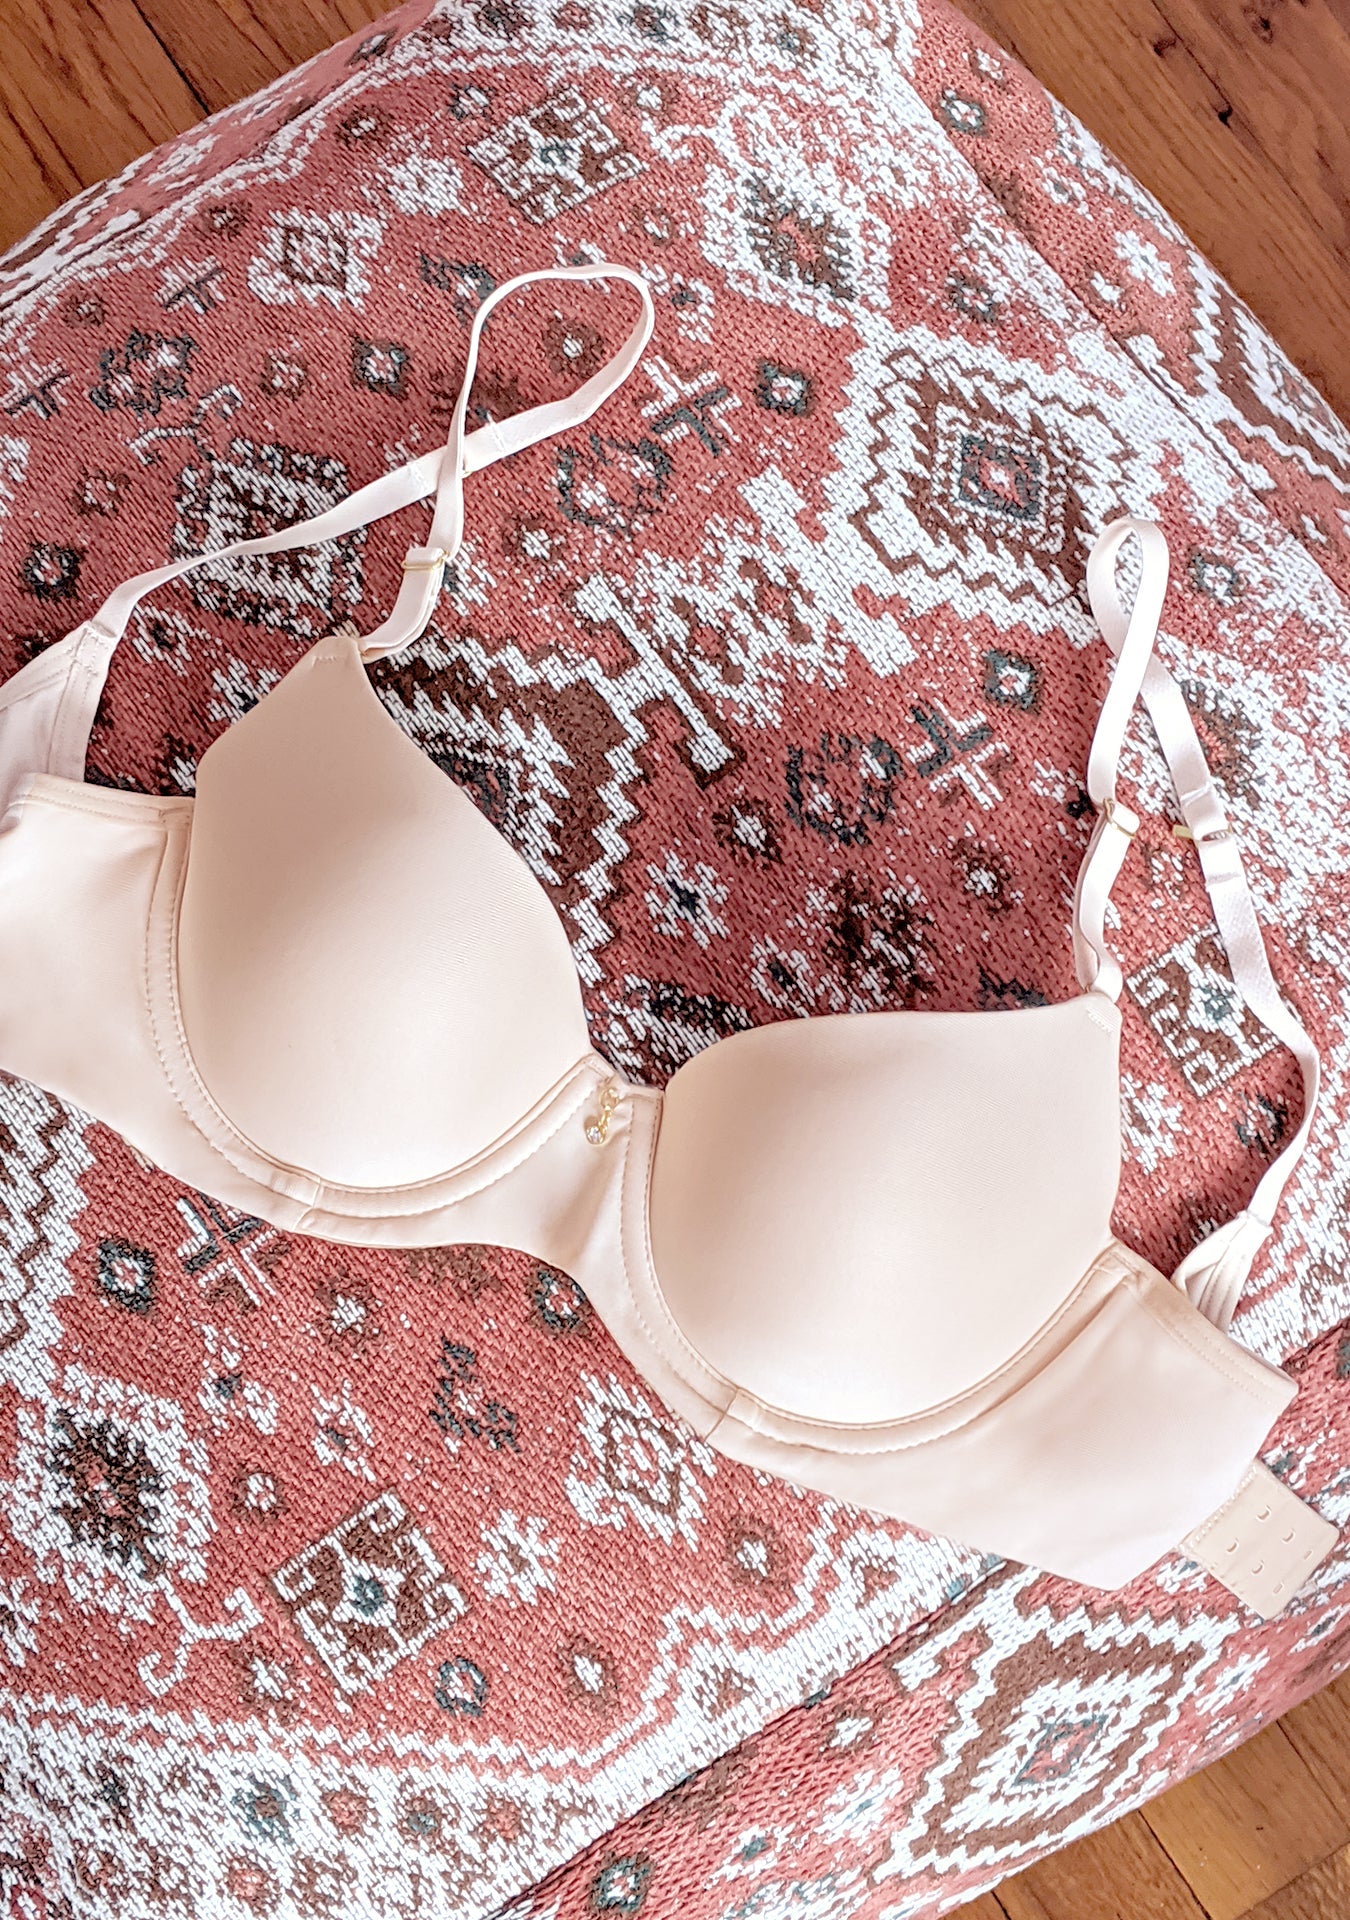 Everyday T-Shirt Bra | In The Buff